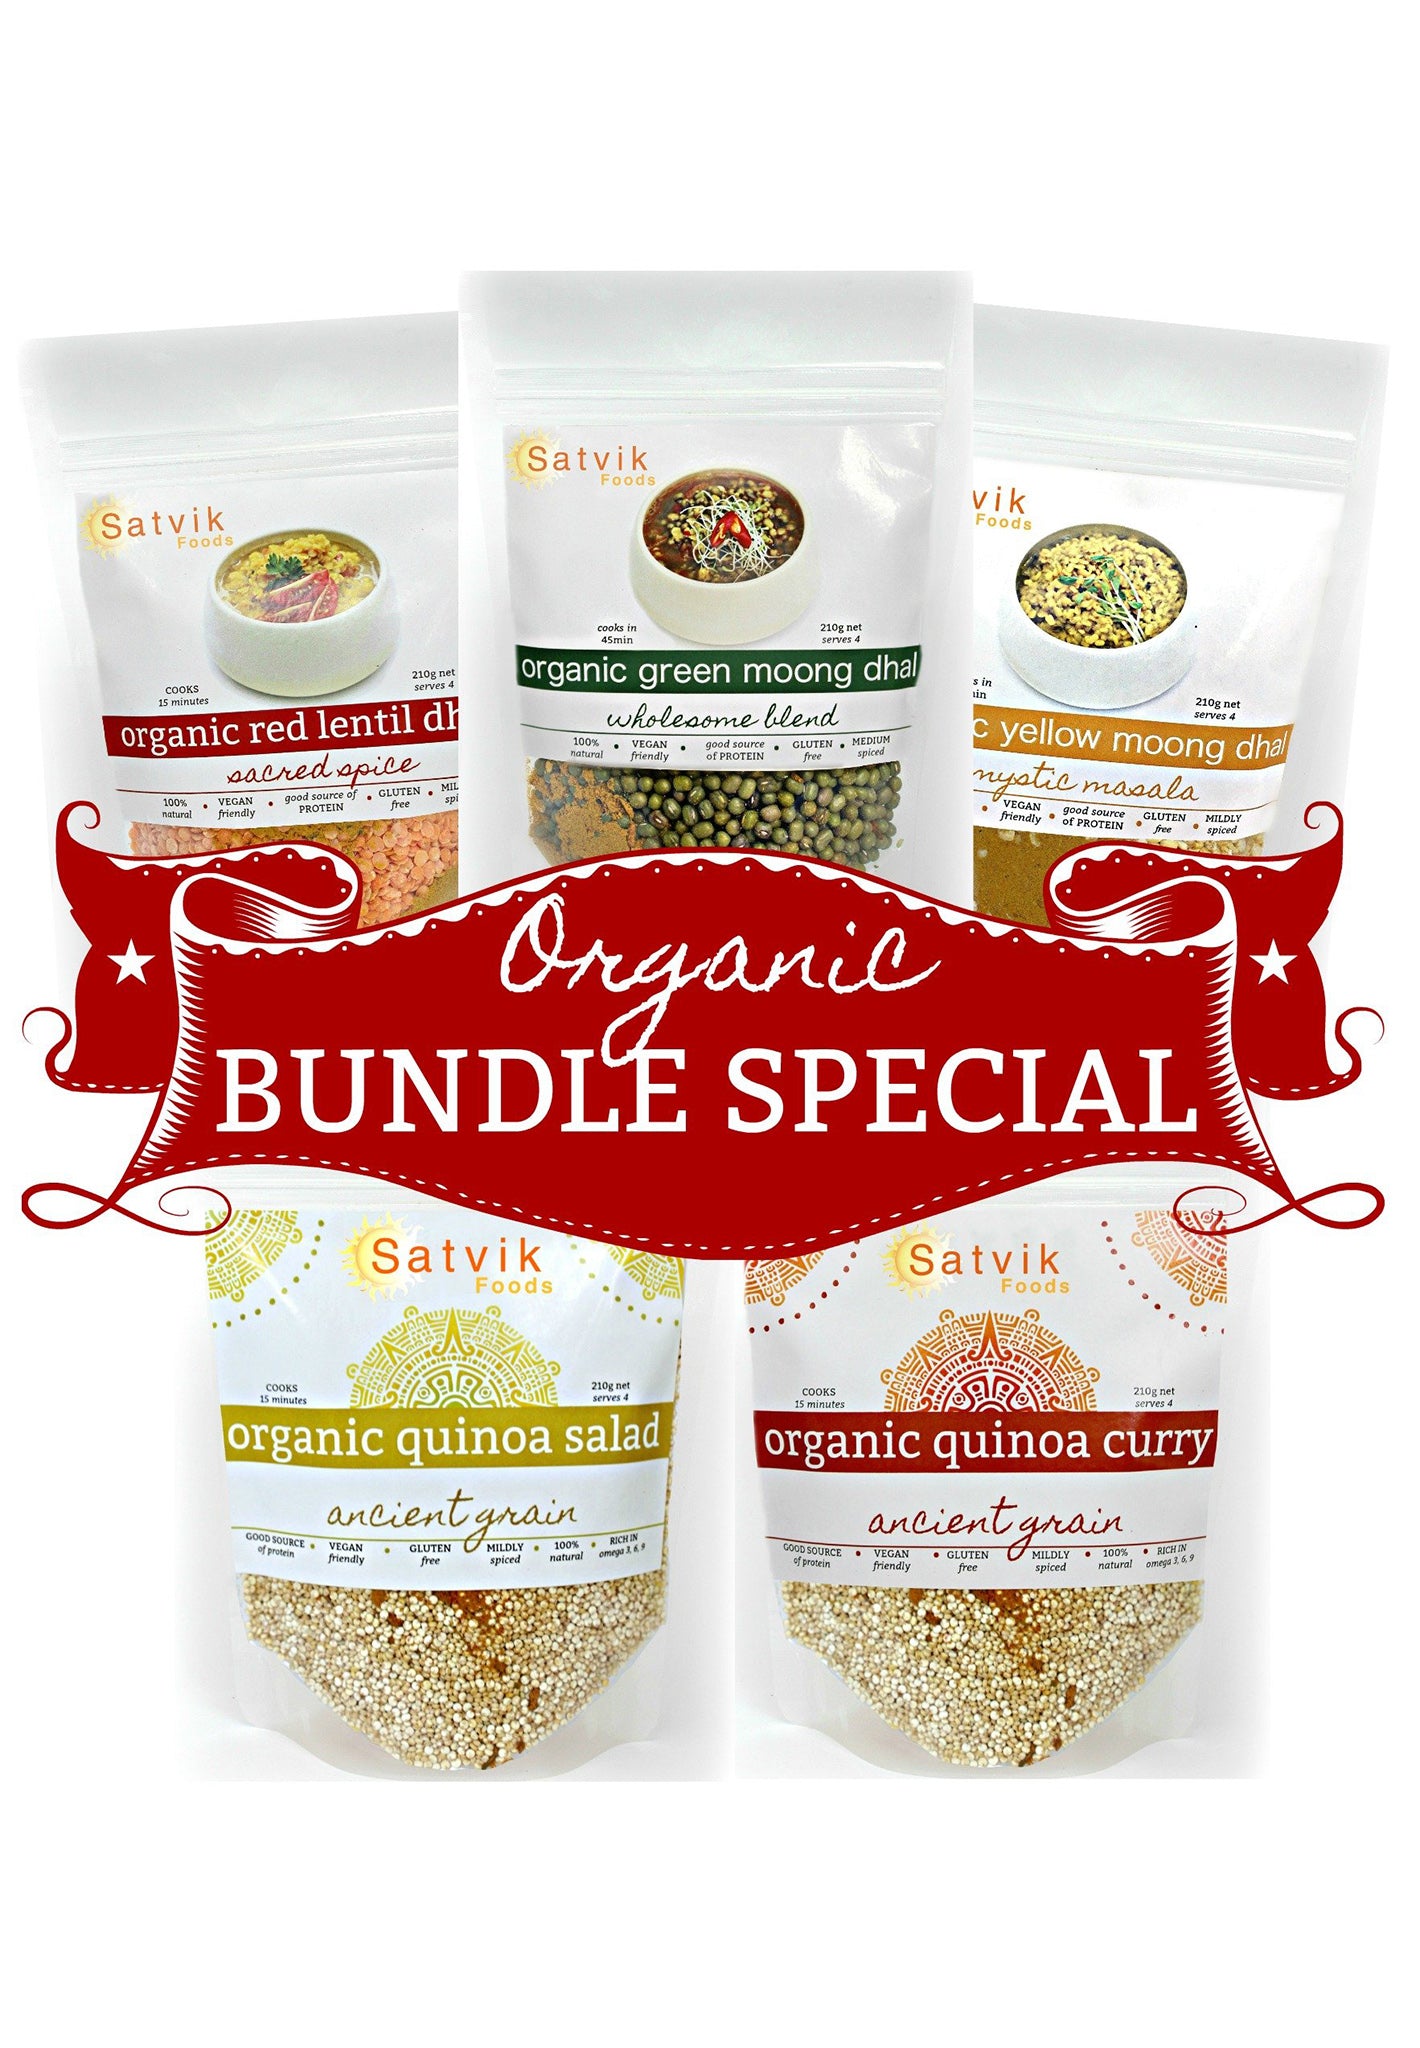 organic bundle special includes Satvik foods organic red lentil dhal, organic green moong dhal, organic yellow moong dhal, organic quinoa salad and organic quinoa curry